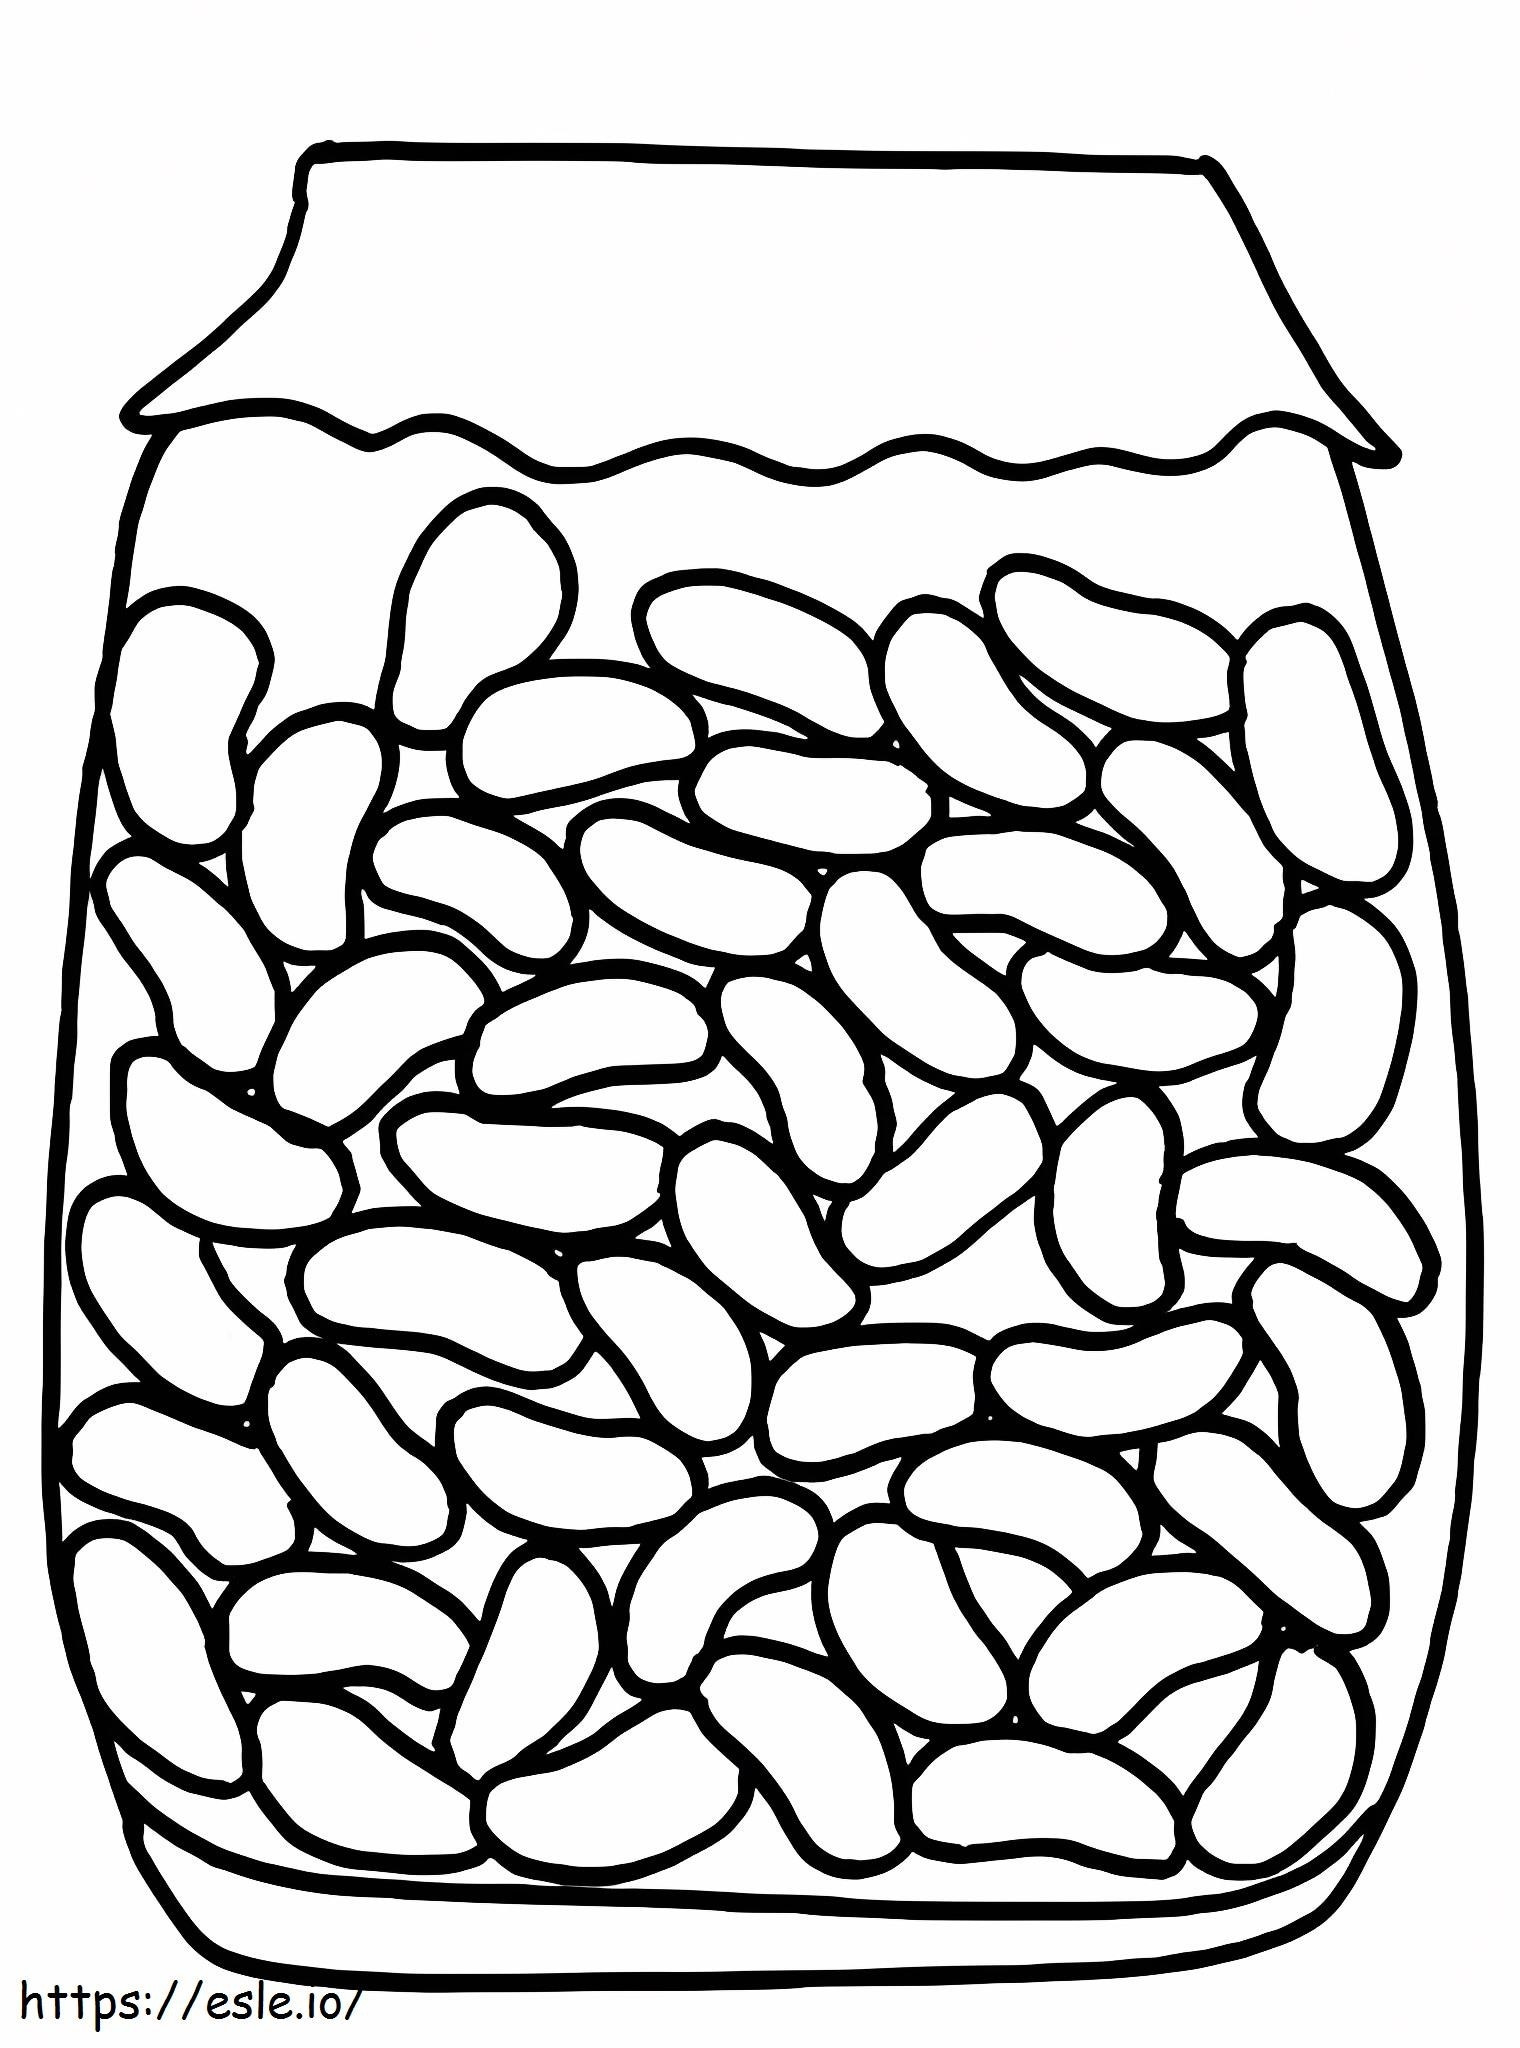 A Jar Of Beans coloring page